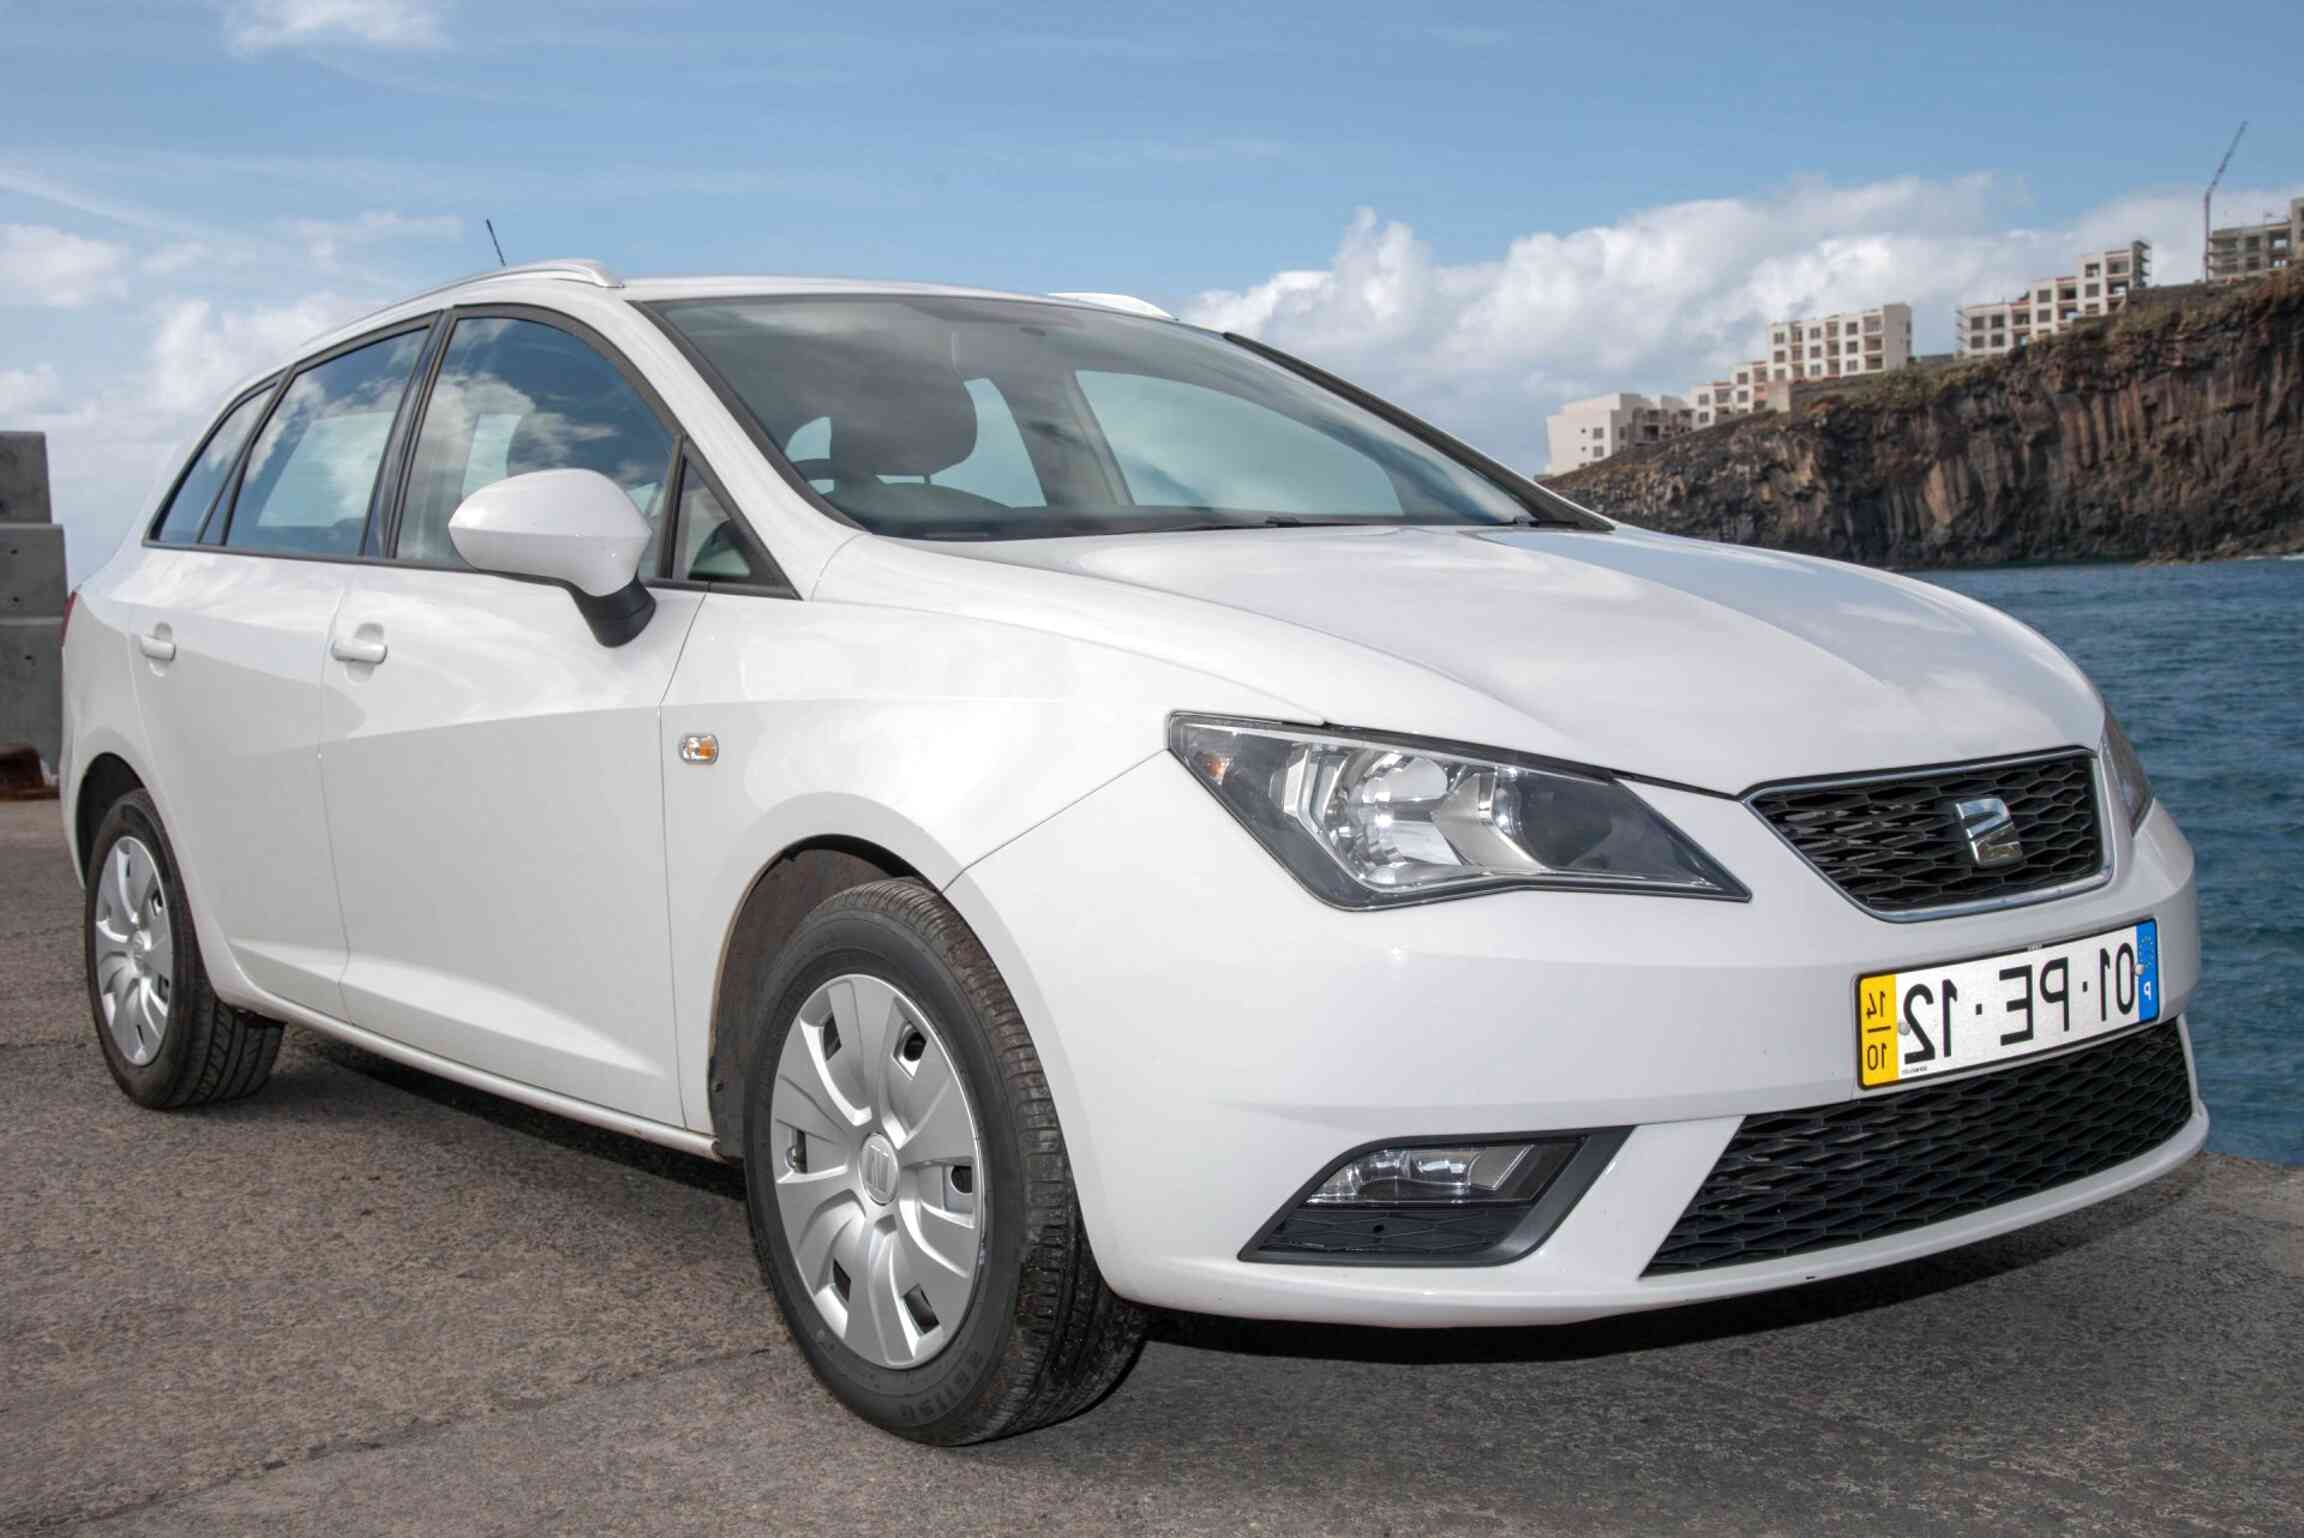 Seat Ibiza Automatic for sale in UK View 47 bargains